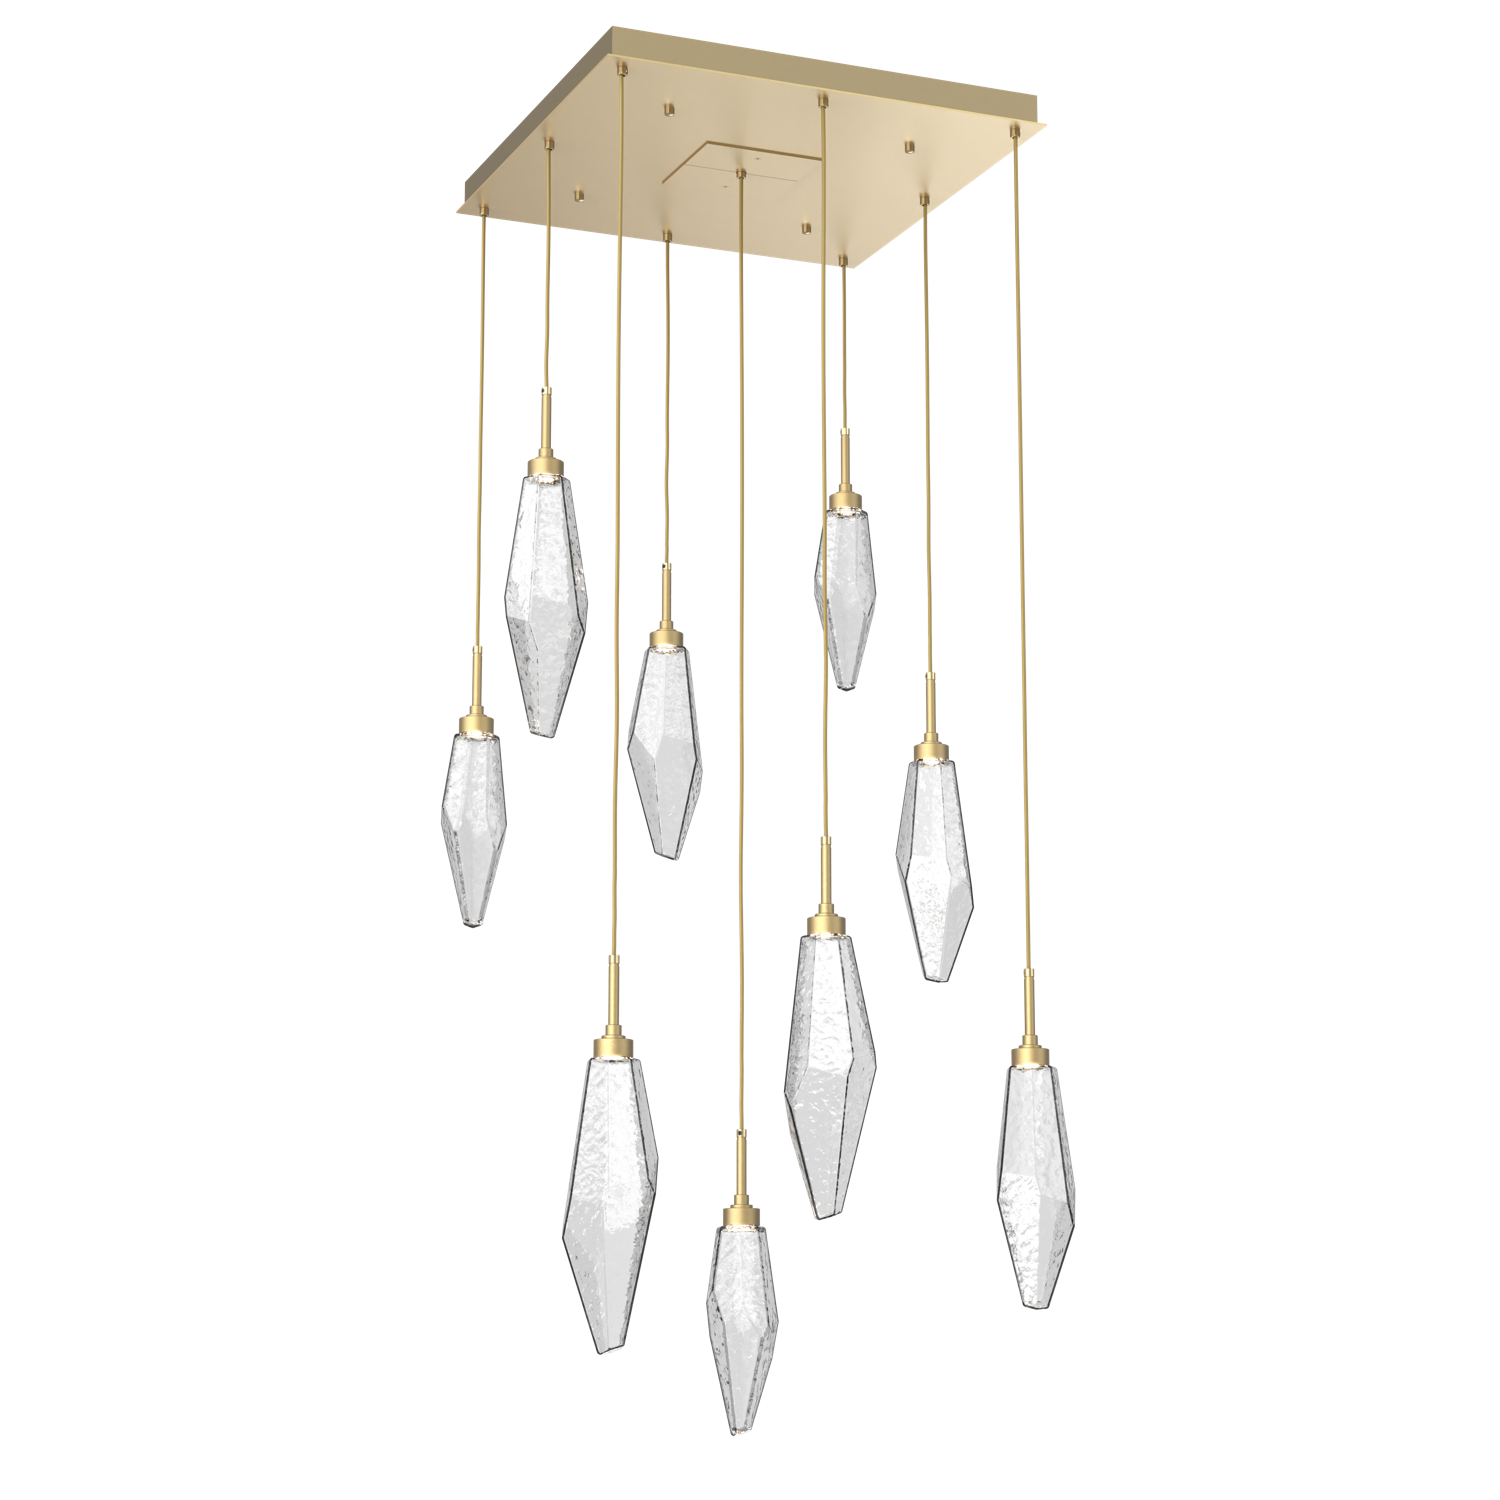 CHB0050-09-GB-CC-Hammerton-Studio-Rock-Crystal-9-light-square-pendant-chandelier-with-gilded-brass-finish-and-clear-glass-shades-and-LED-lamping